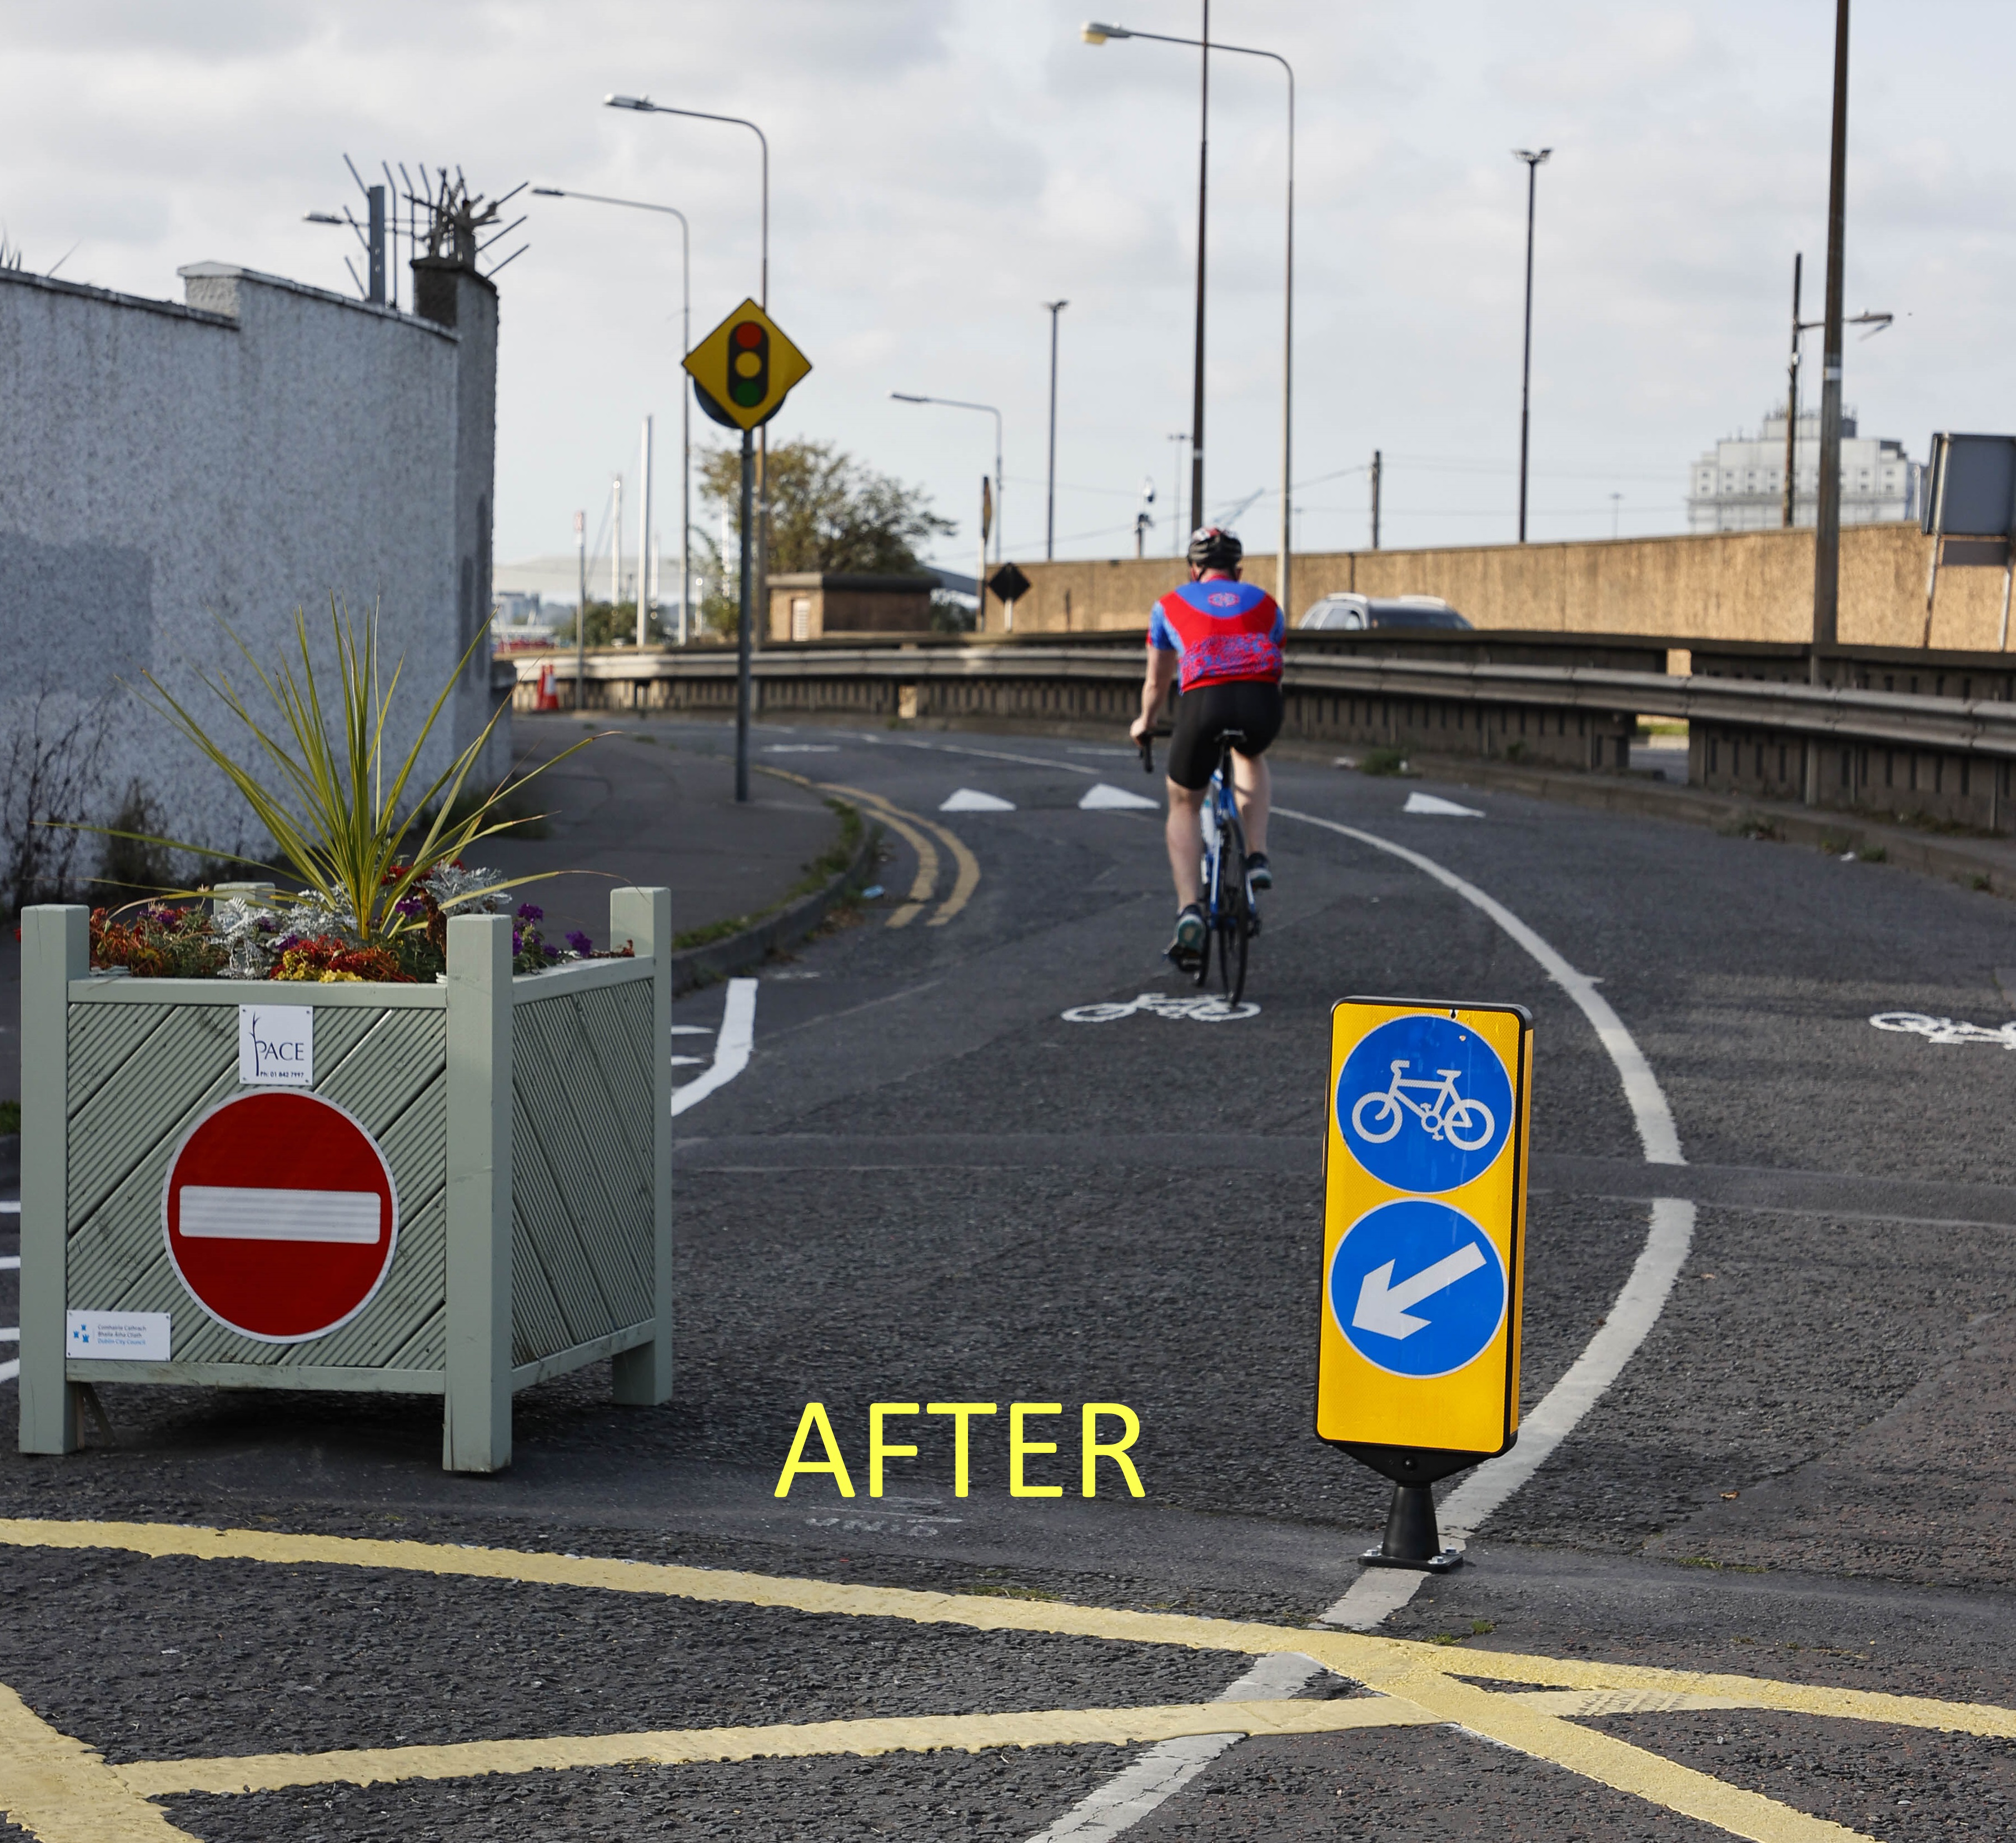 This image show Pigeon House Road after the filtered permeability scheme is installed. There is no traffic congestion and a cyclist is using the route.